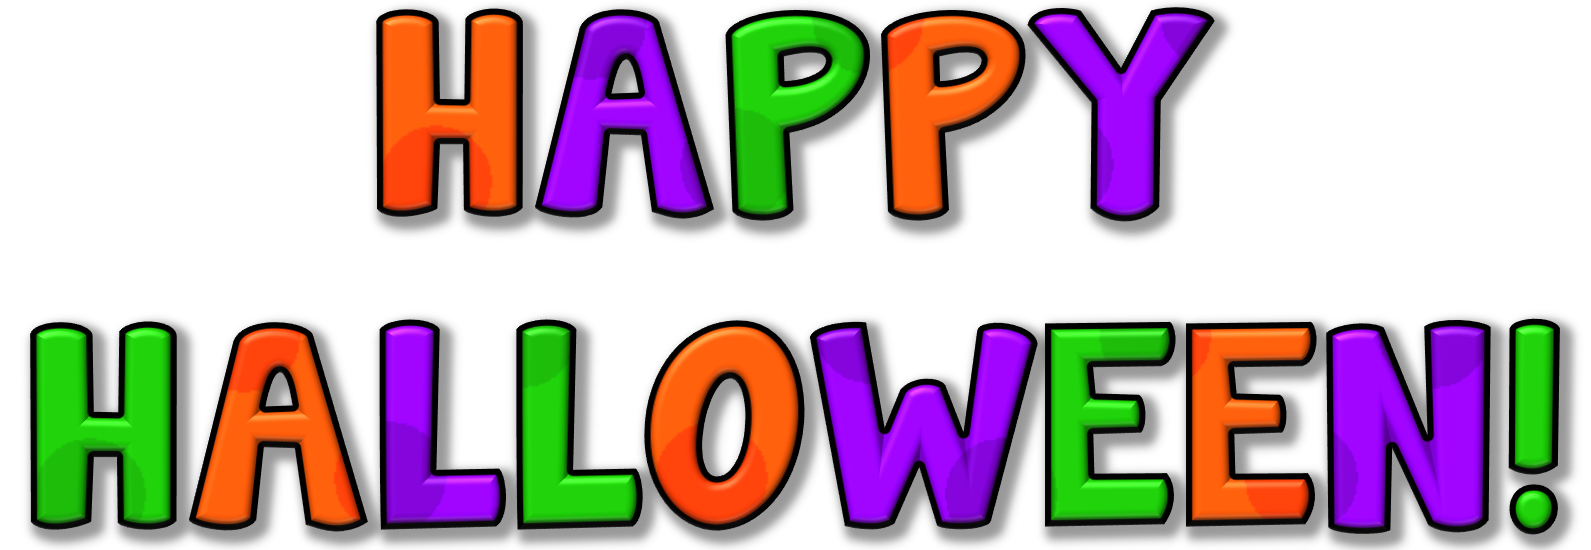 Happy halloween clipart free large images